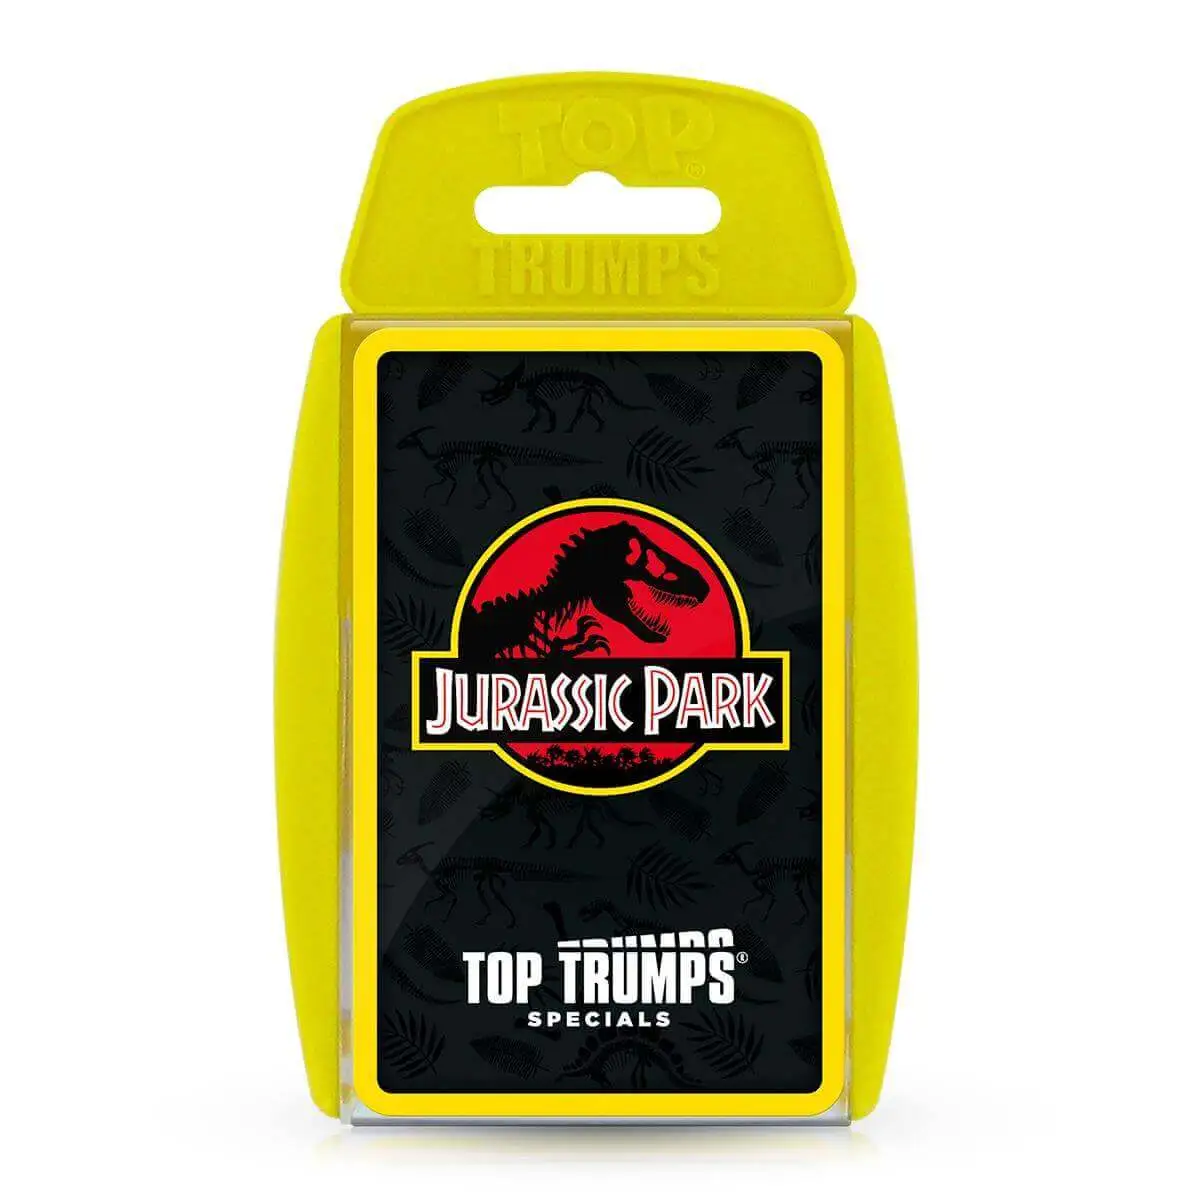 Jurassic Park Top Trumps Specials from Pennells